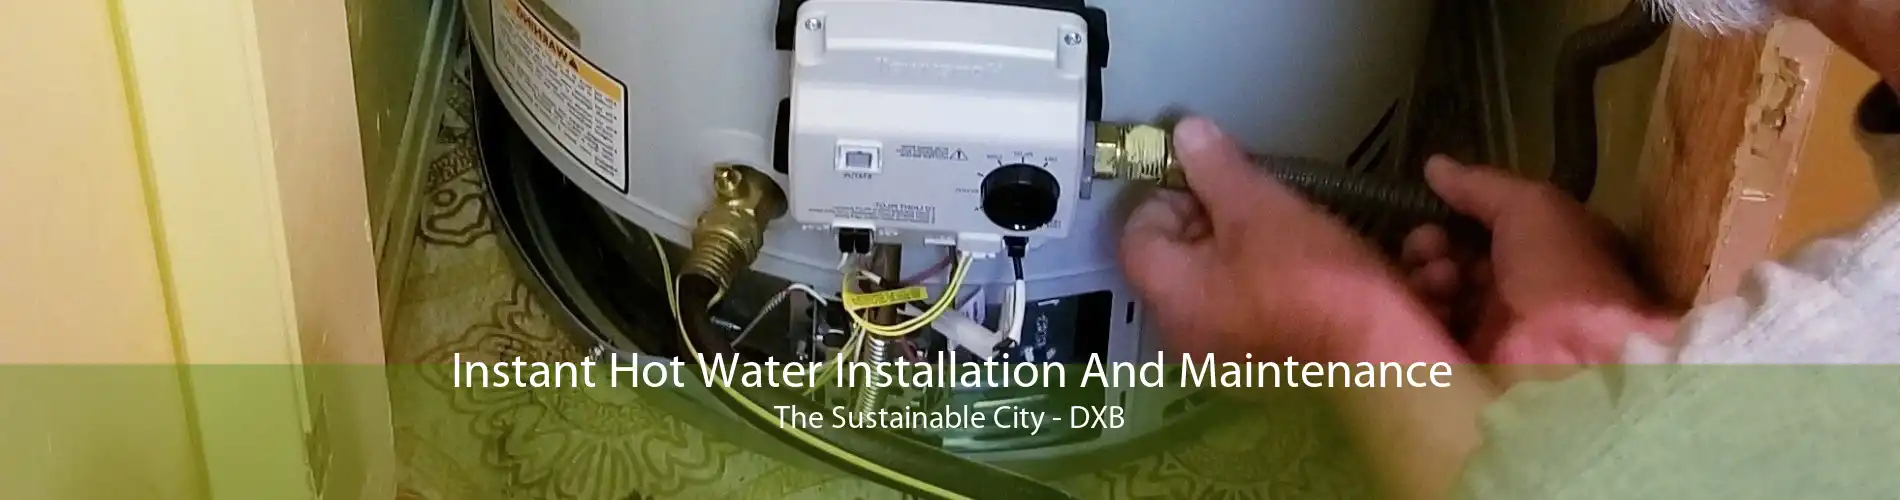 Instant Hot Water Installation And Maintenance The Sustainable City - DXB